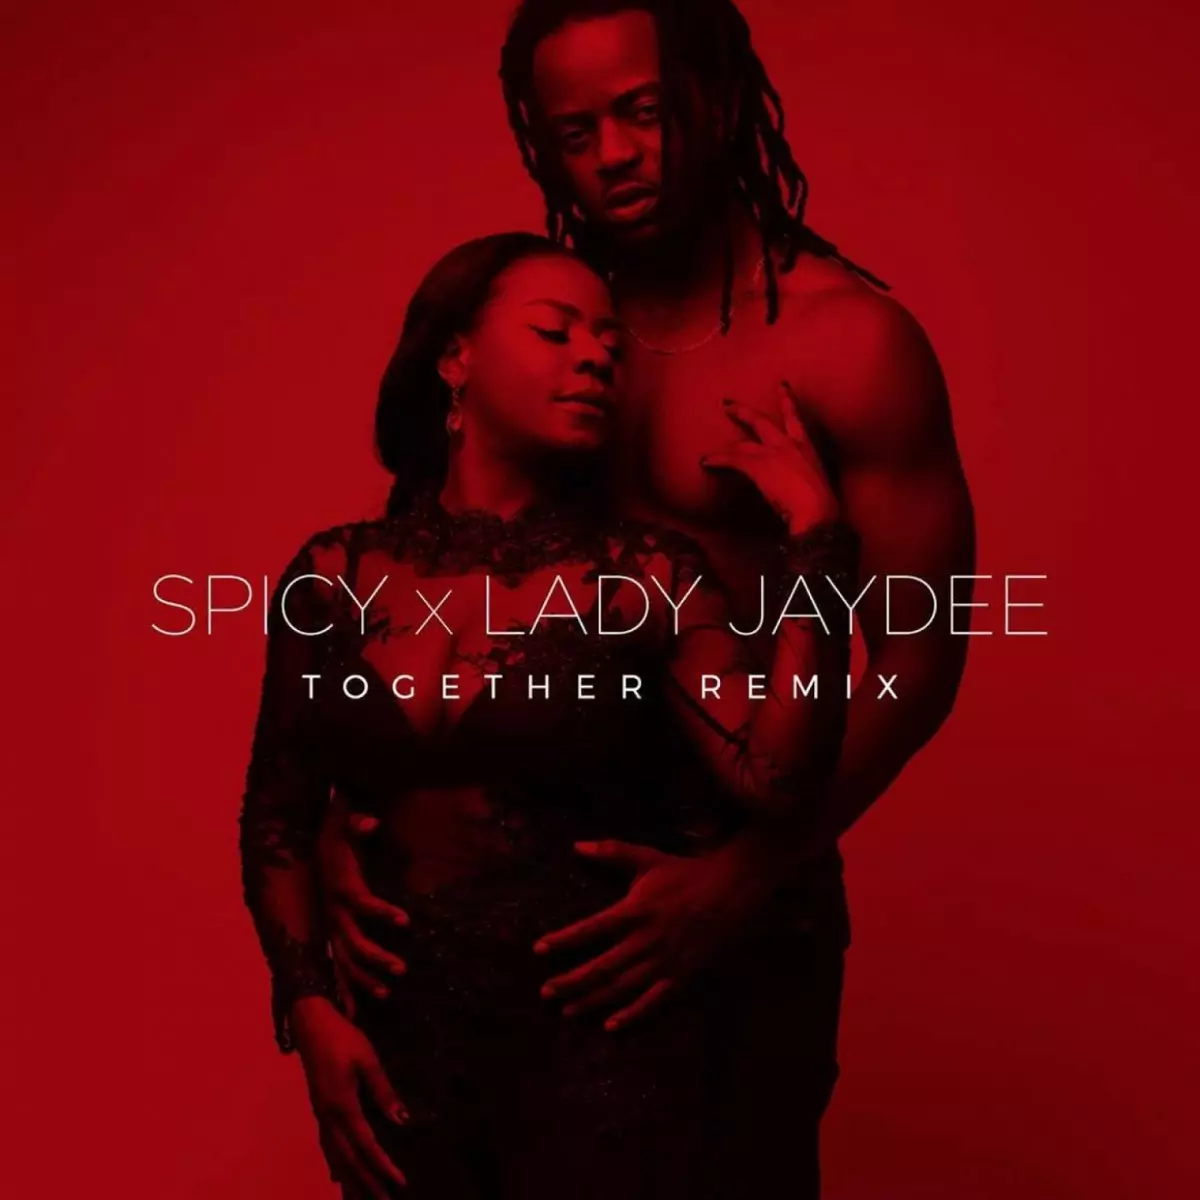 Together (feat. Spicy) [Remix] - Single by Lady Jaydee on Apple Music